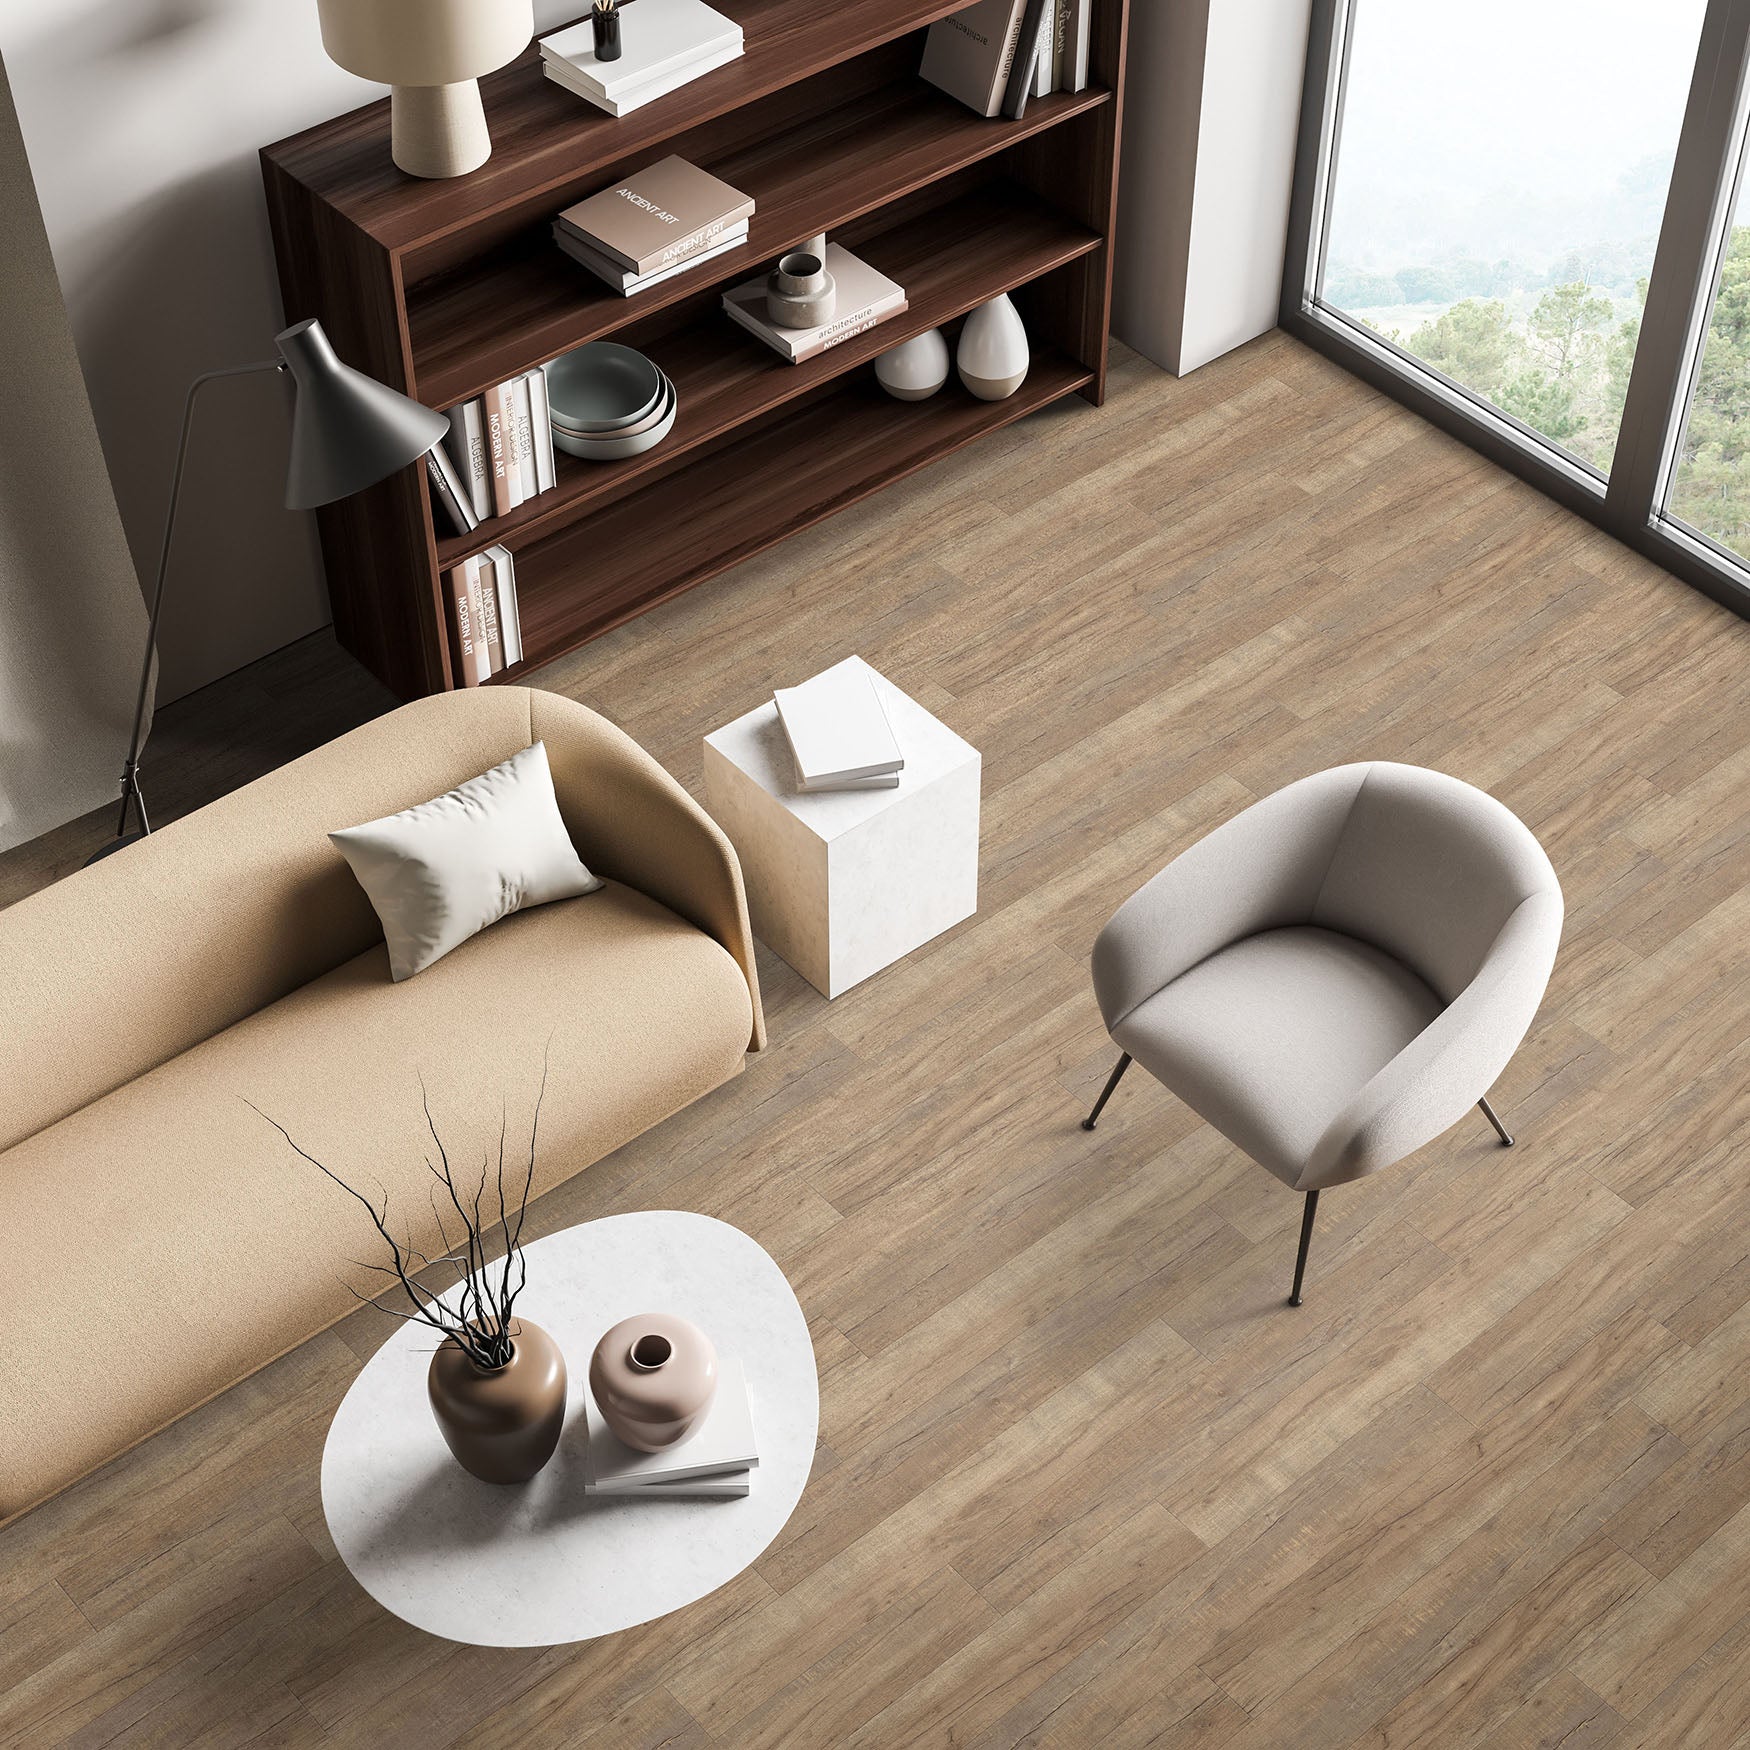 Creating a Stylish and Practical Home with the Right Residential Flooring